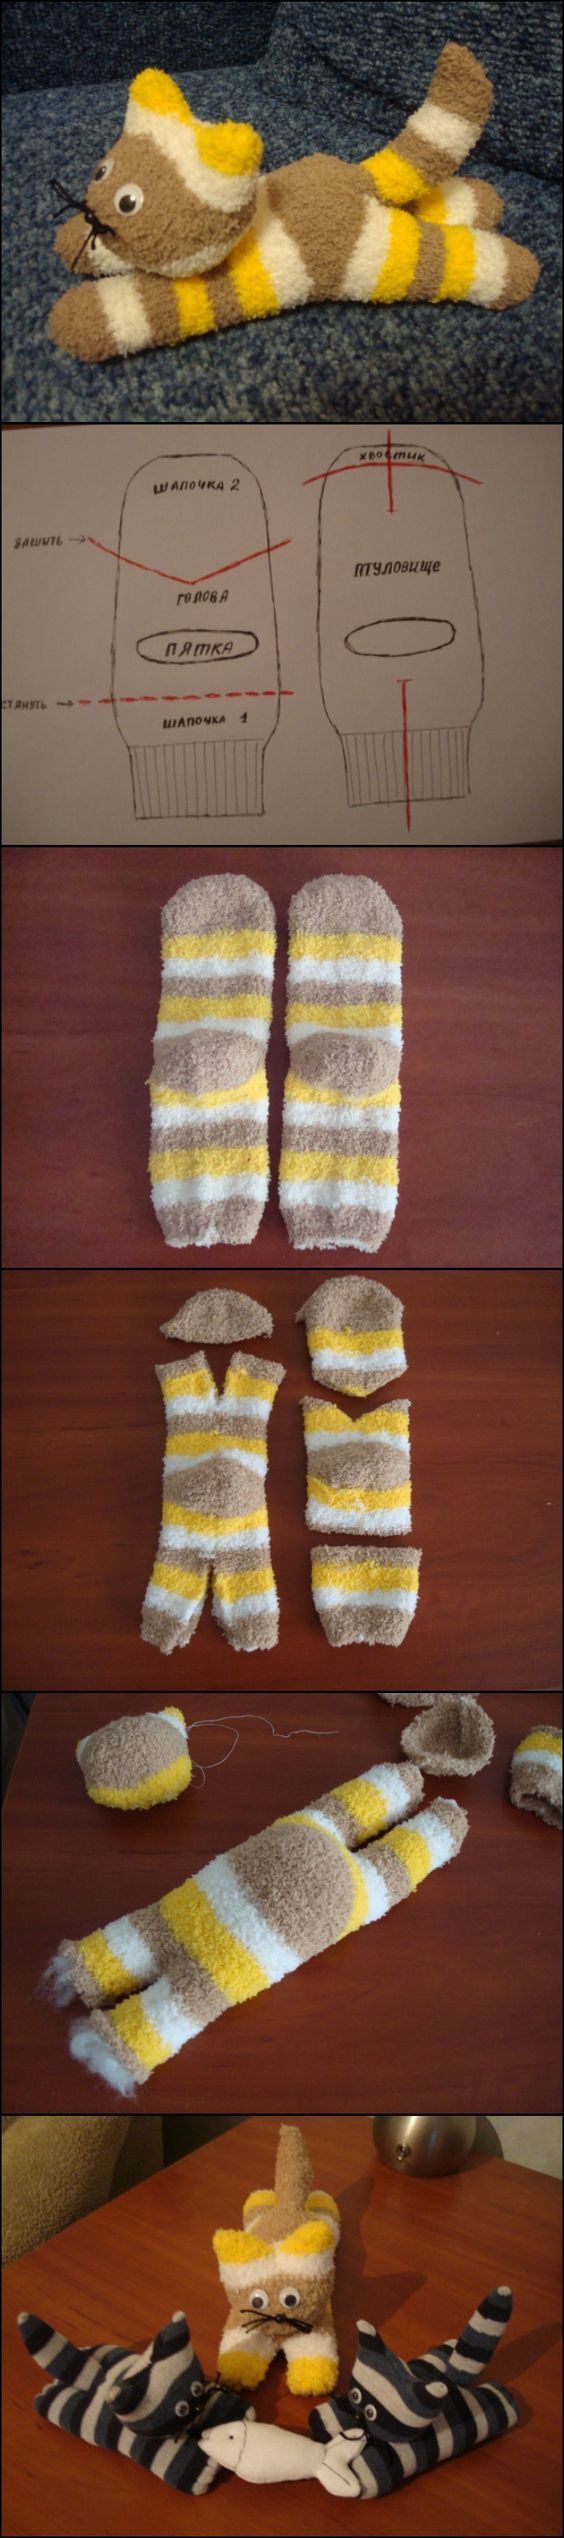 Adorable Sock Kitten Tutorial! I bet any little one would enjoy having and/or making this (depending on age, obviously)!